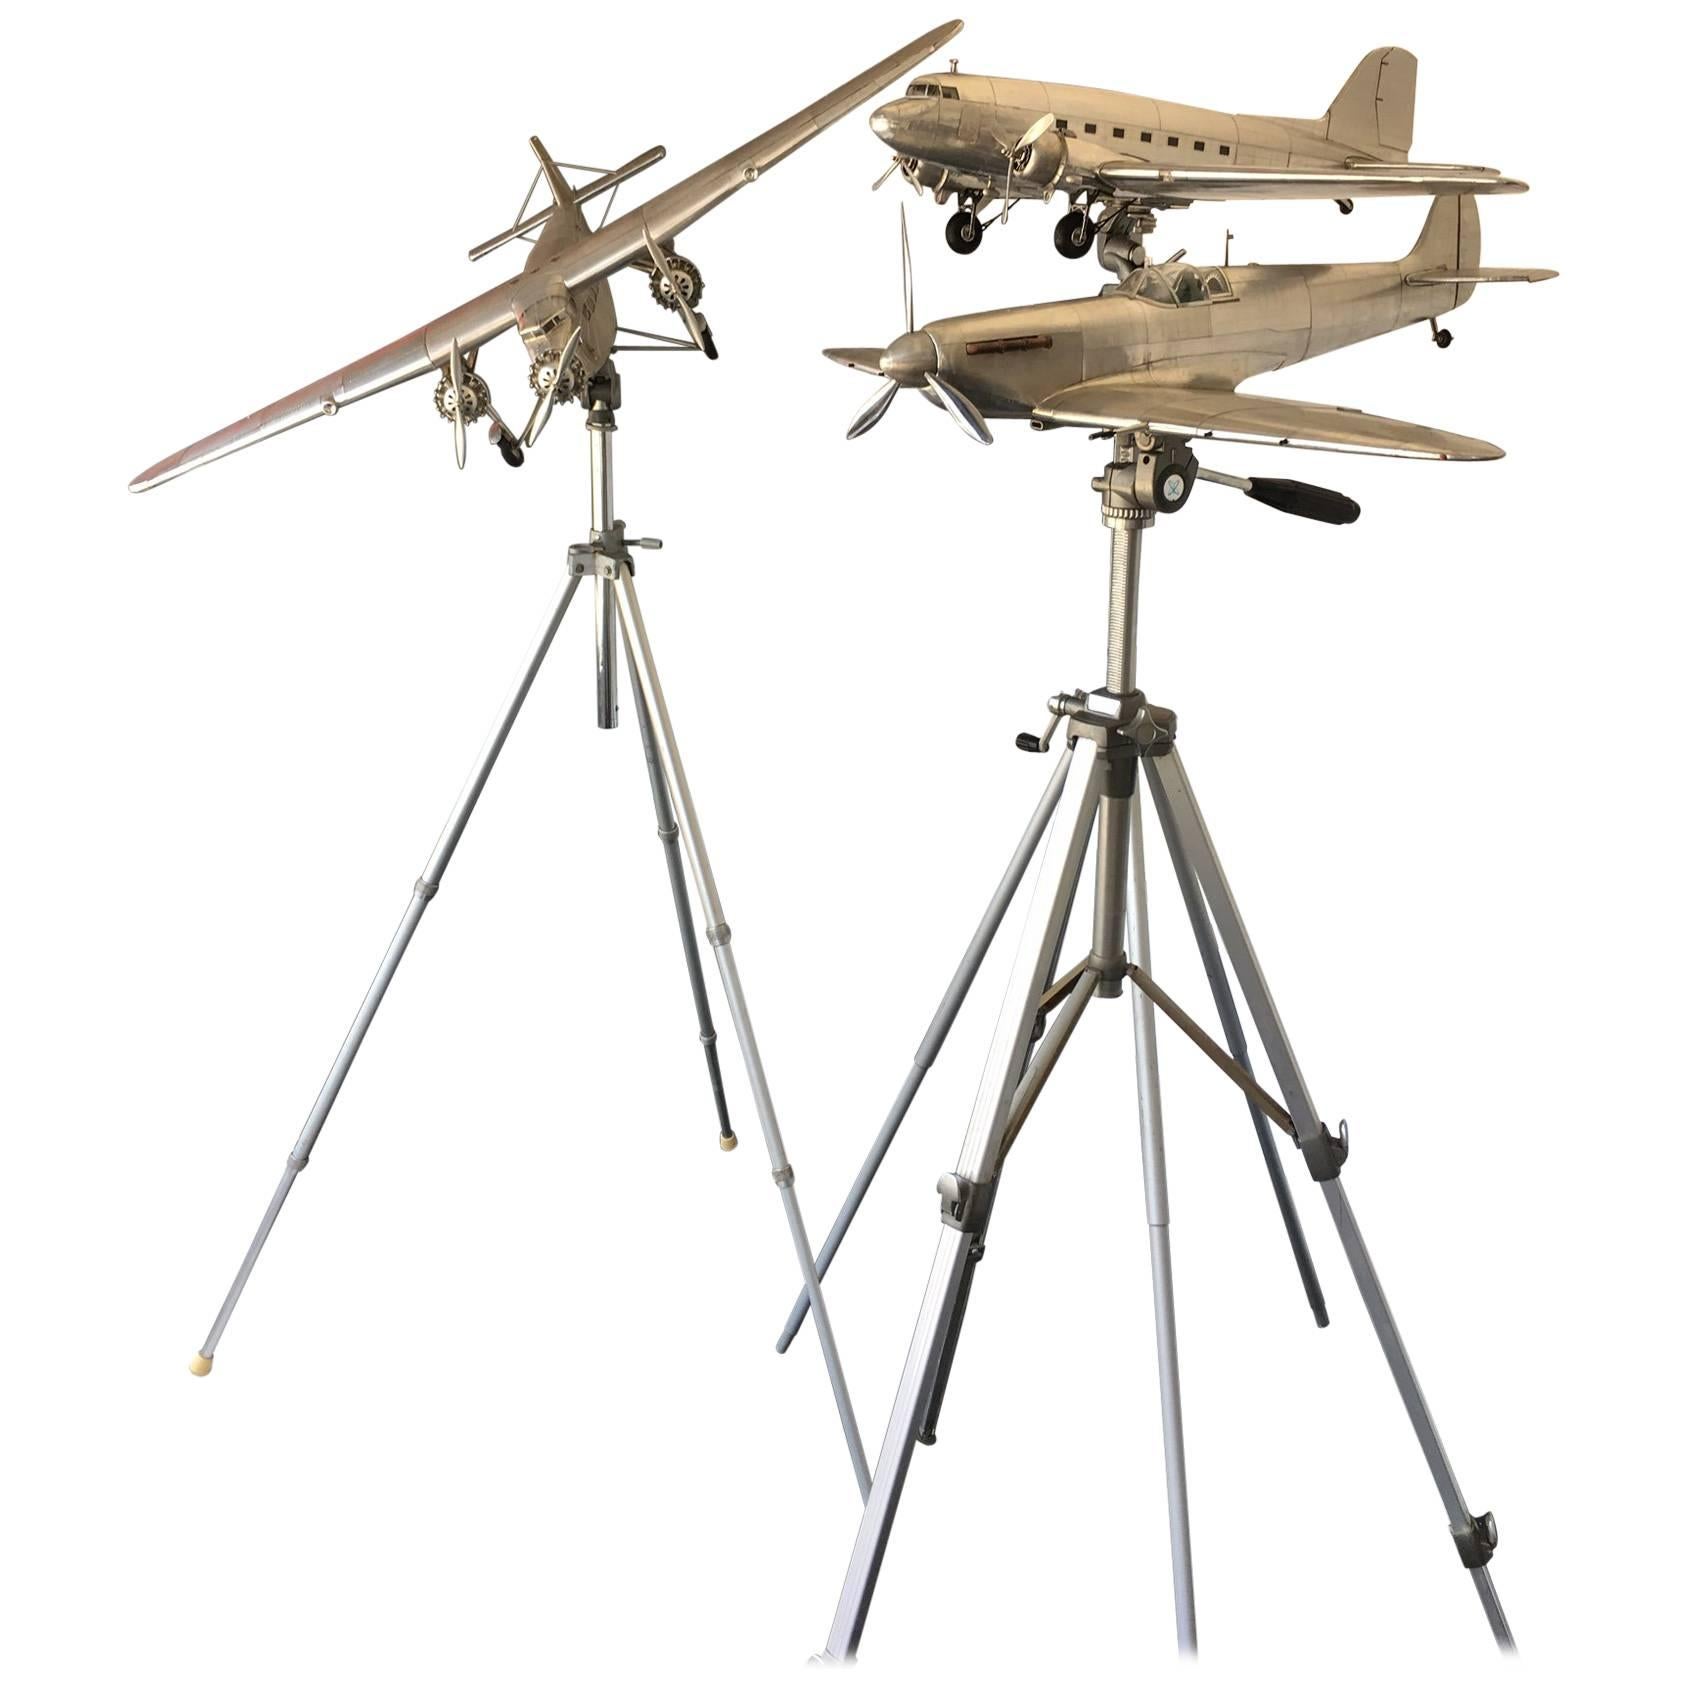 Airplane Scale Models with Adjustable Tripod